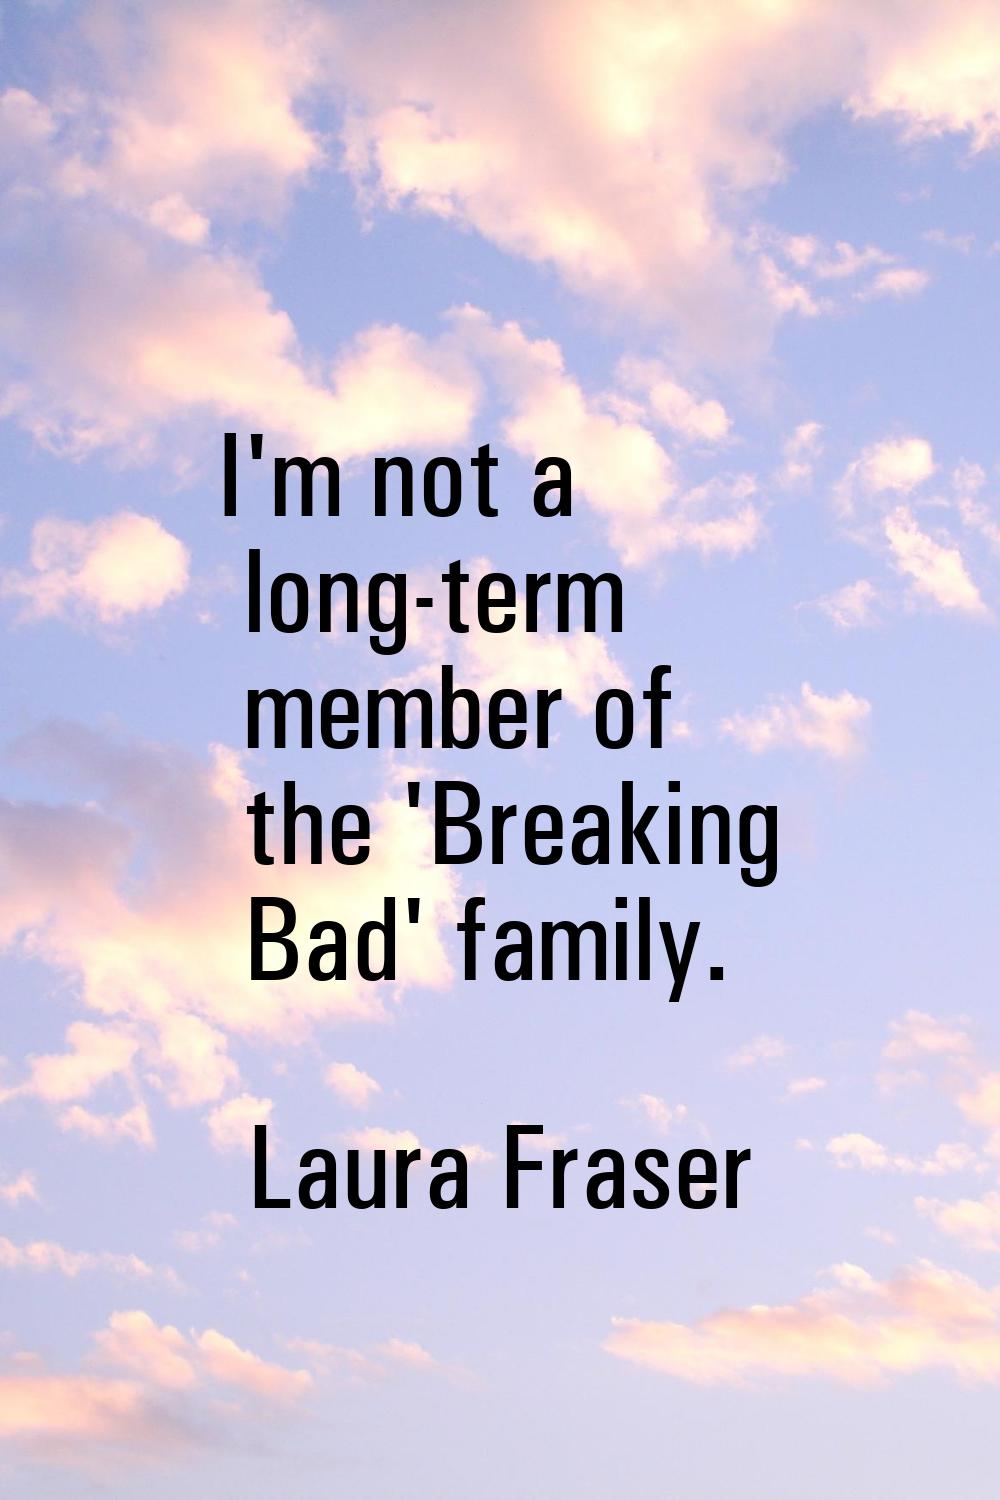 I'm not a long-term member of the 'Breaking Bad' family.